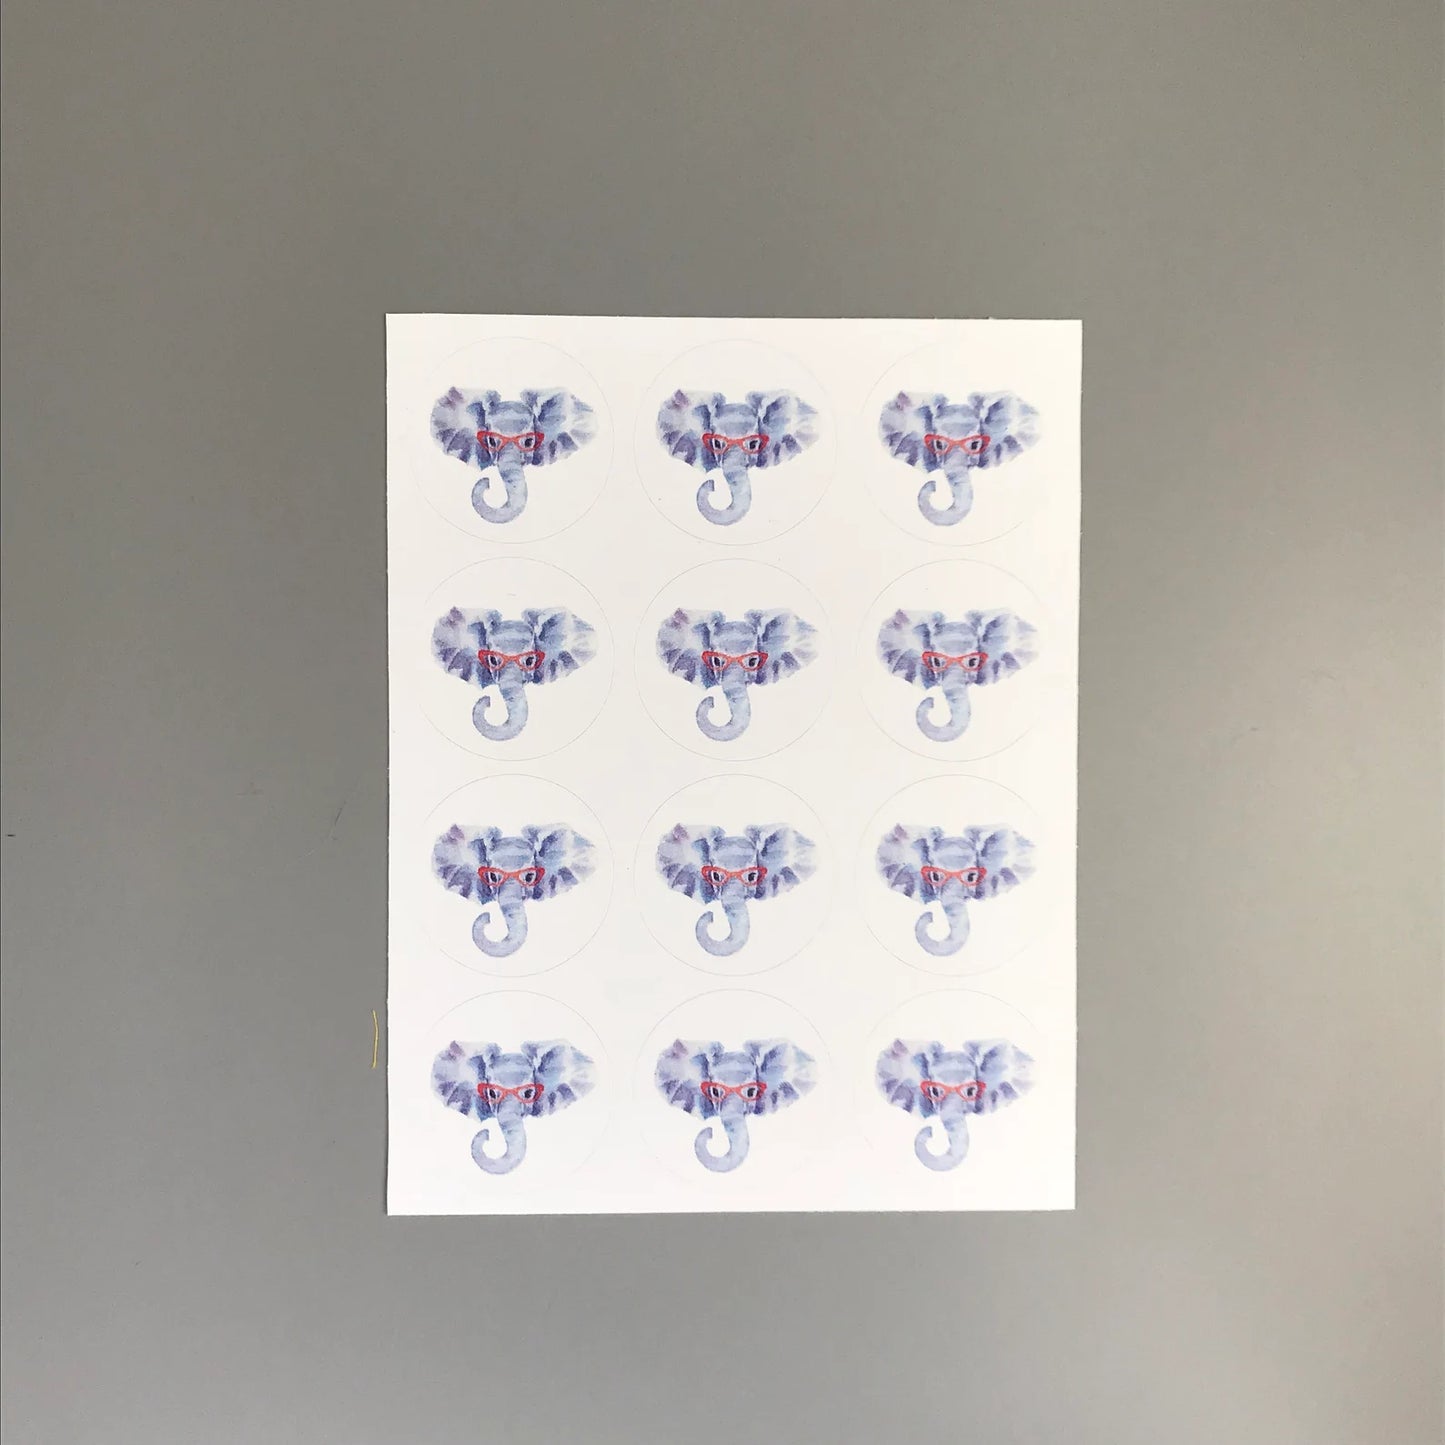 Elephant in Glasses Note Card Set